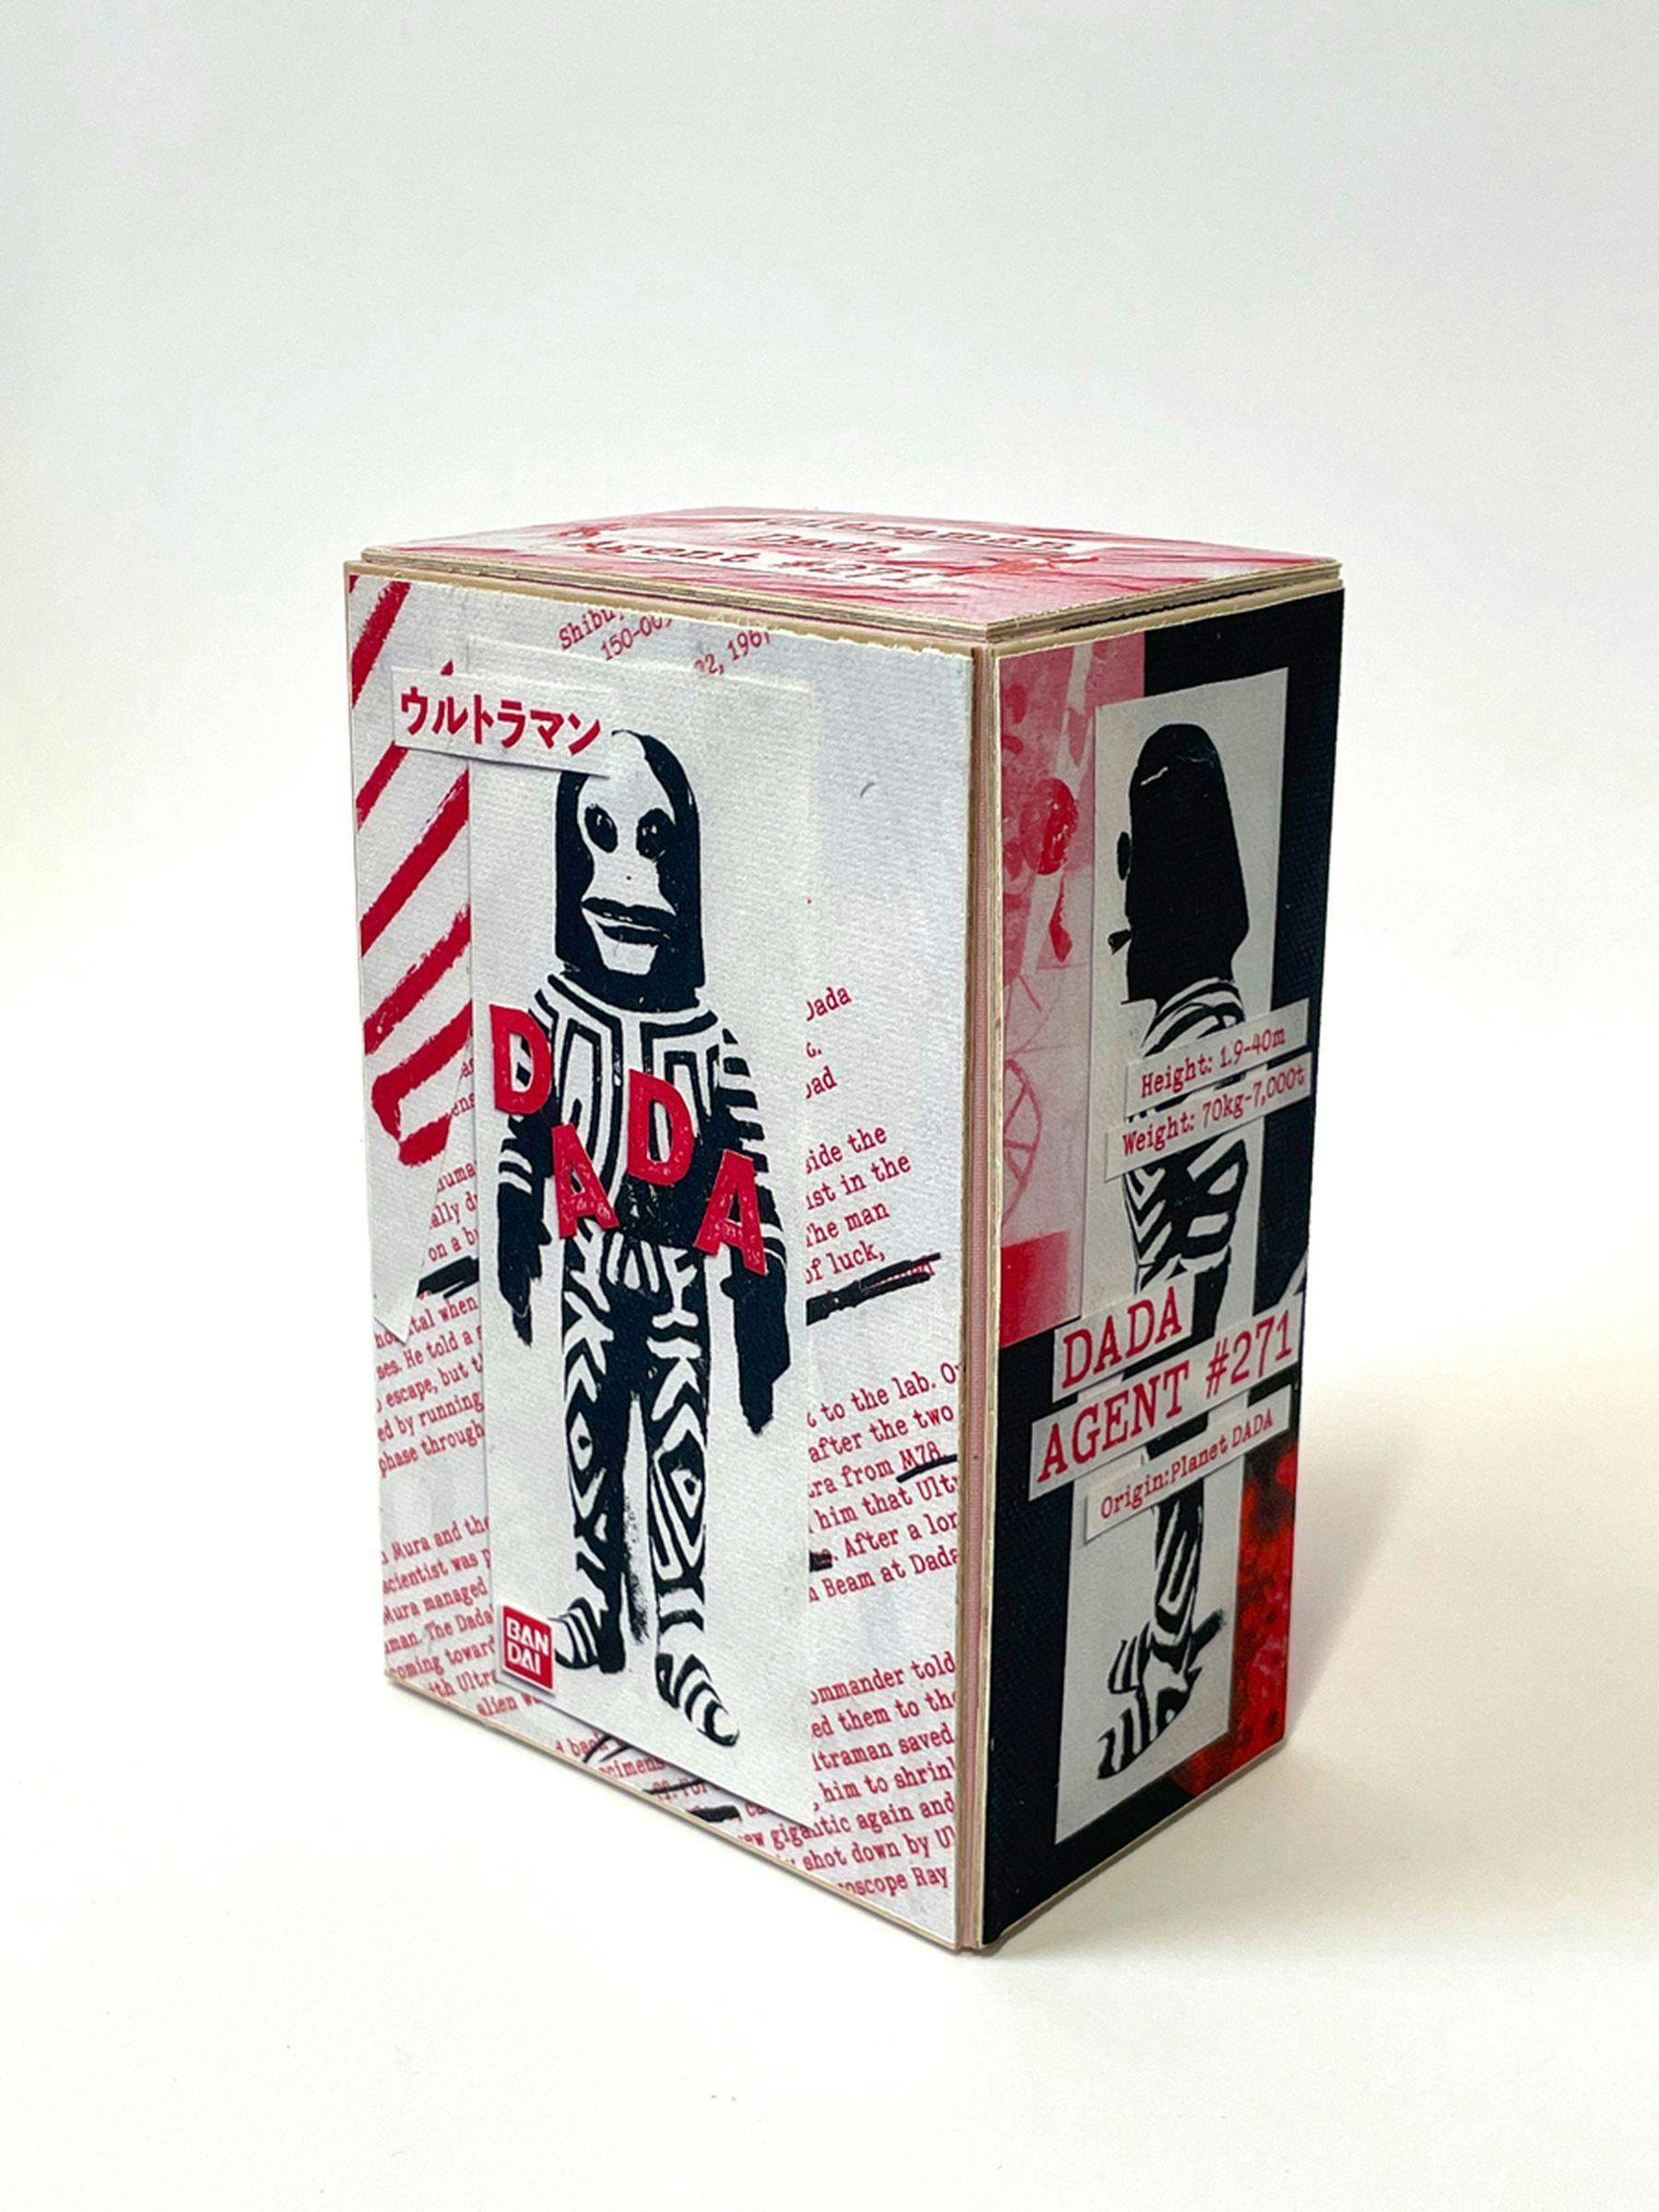 A photograph of a cardboard box with a black alien like figure positioned behind the title in pink lettering “dada”. There is another title in Japanese and paragraphs of pink text.